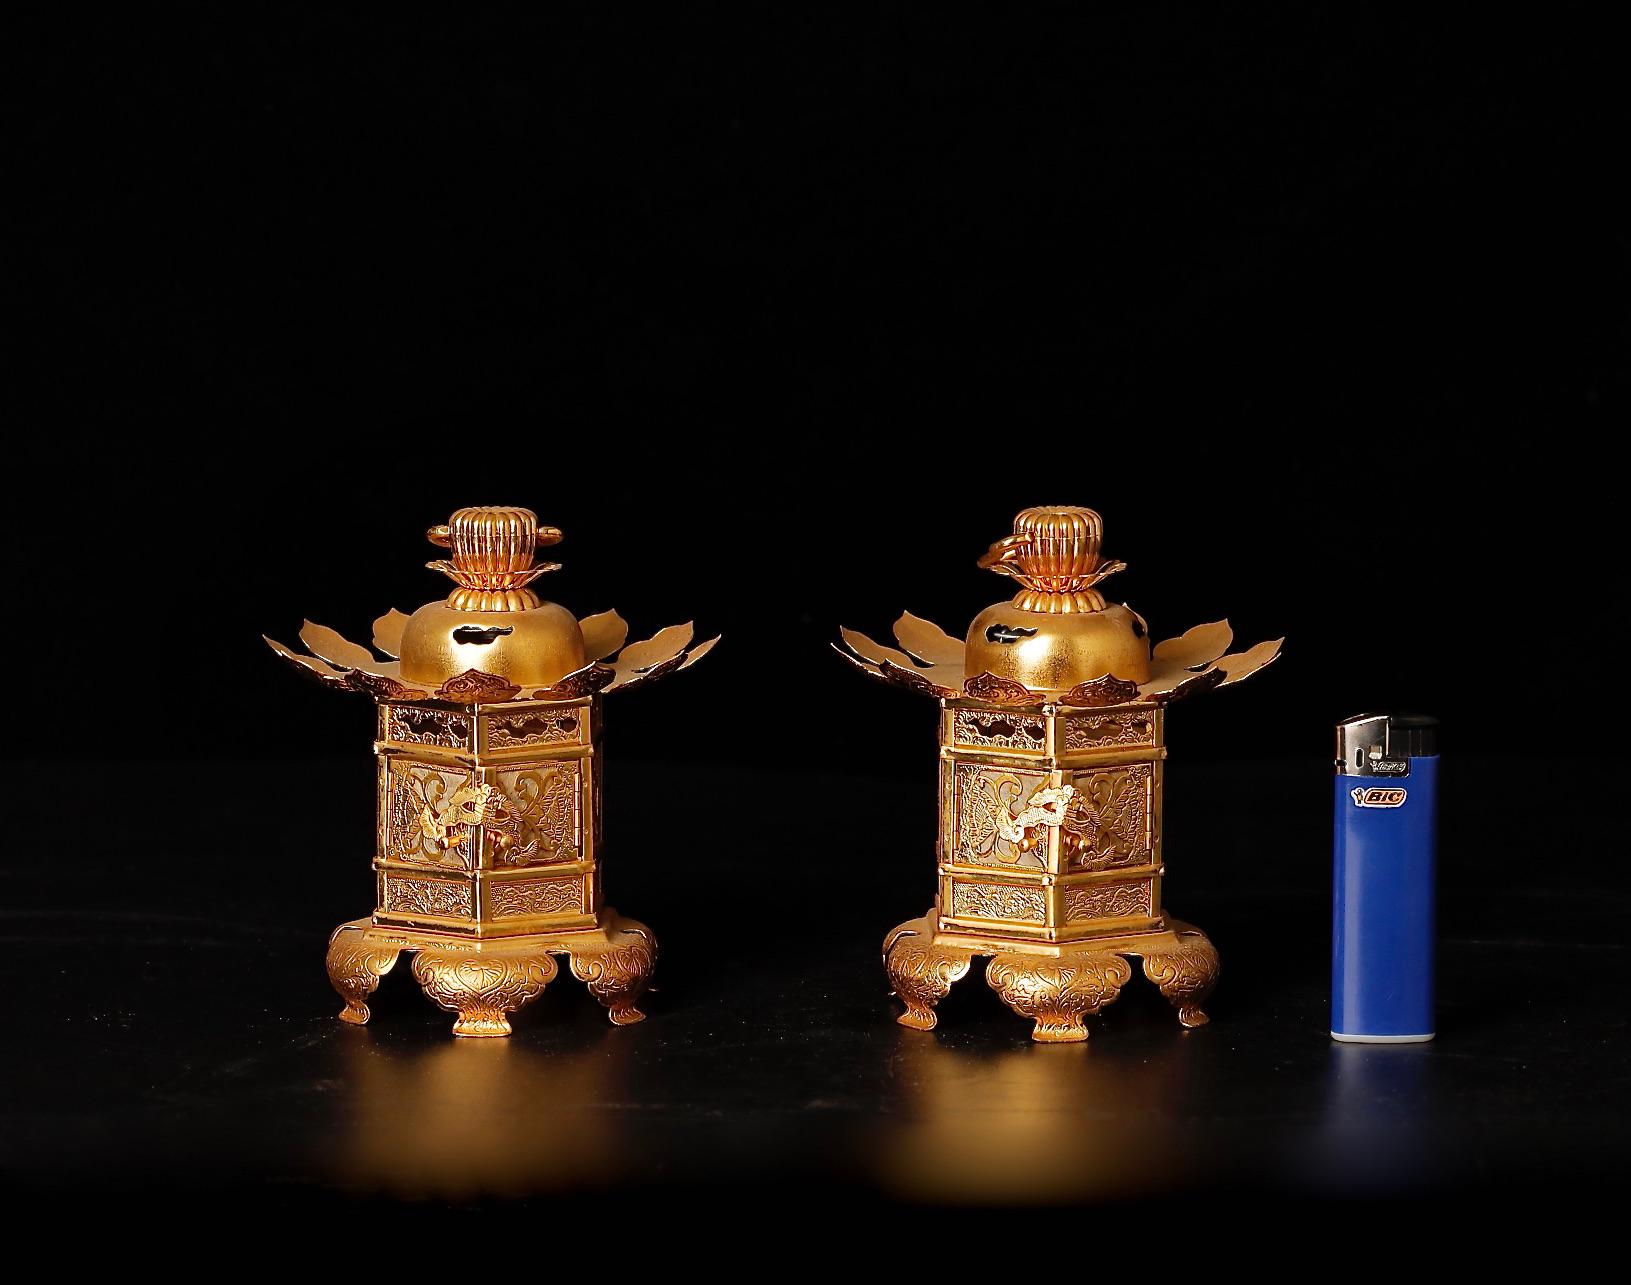 Presenting a pair of mid-20th-century gilded lanterns (SKU: ZD23), this set emanates the spiritual aura and artistic heritage of Buddhist traditions. Originally used within the context of a portable altar, these lanterns were crafted to illuminate